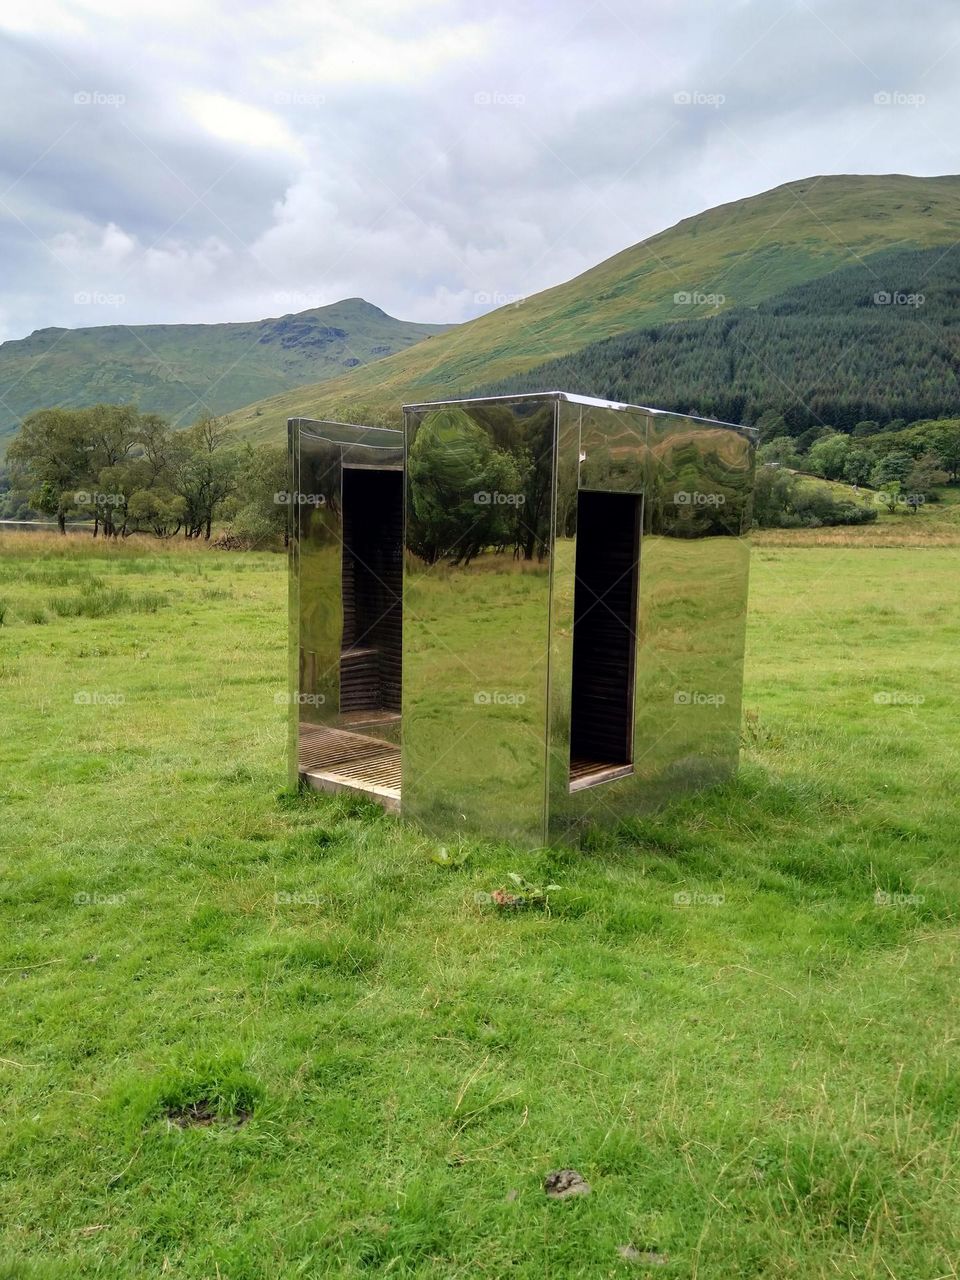 mirrored box in national park loch Lomond reflecting the surrounding scenery